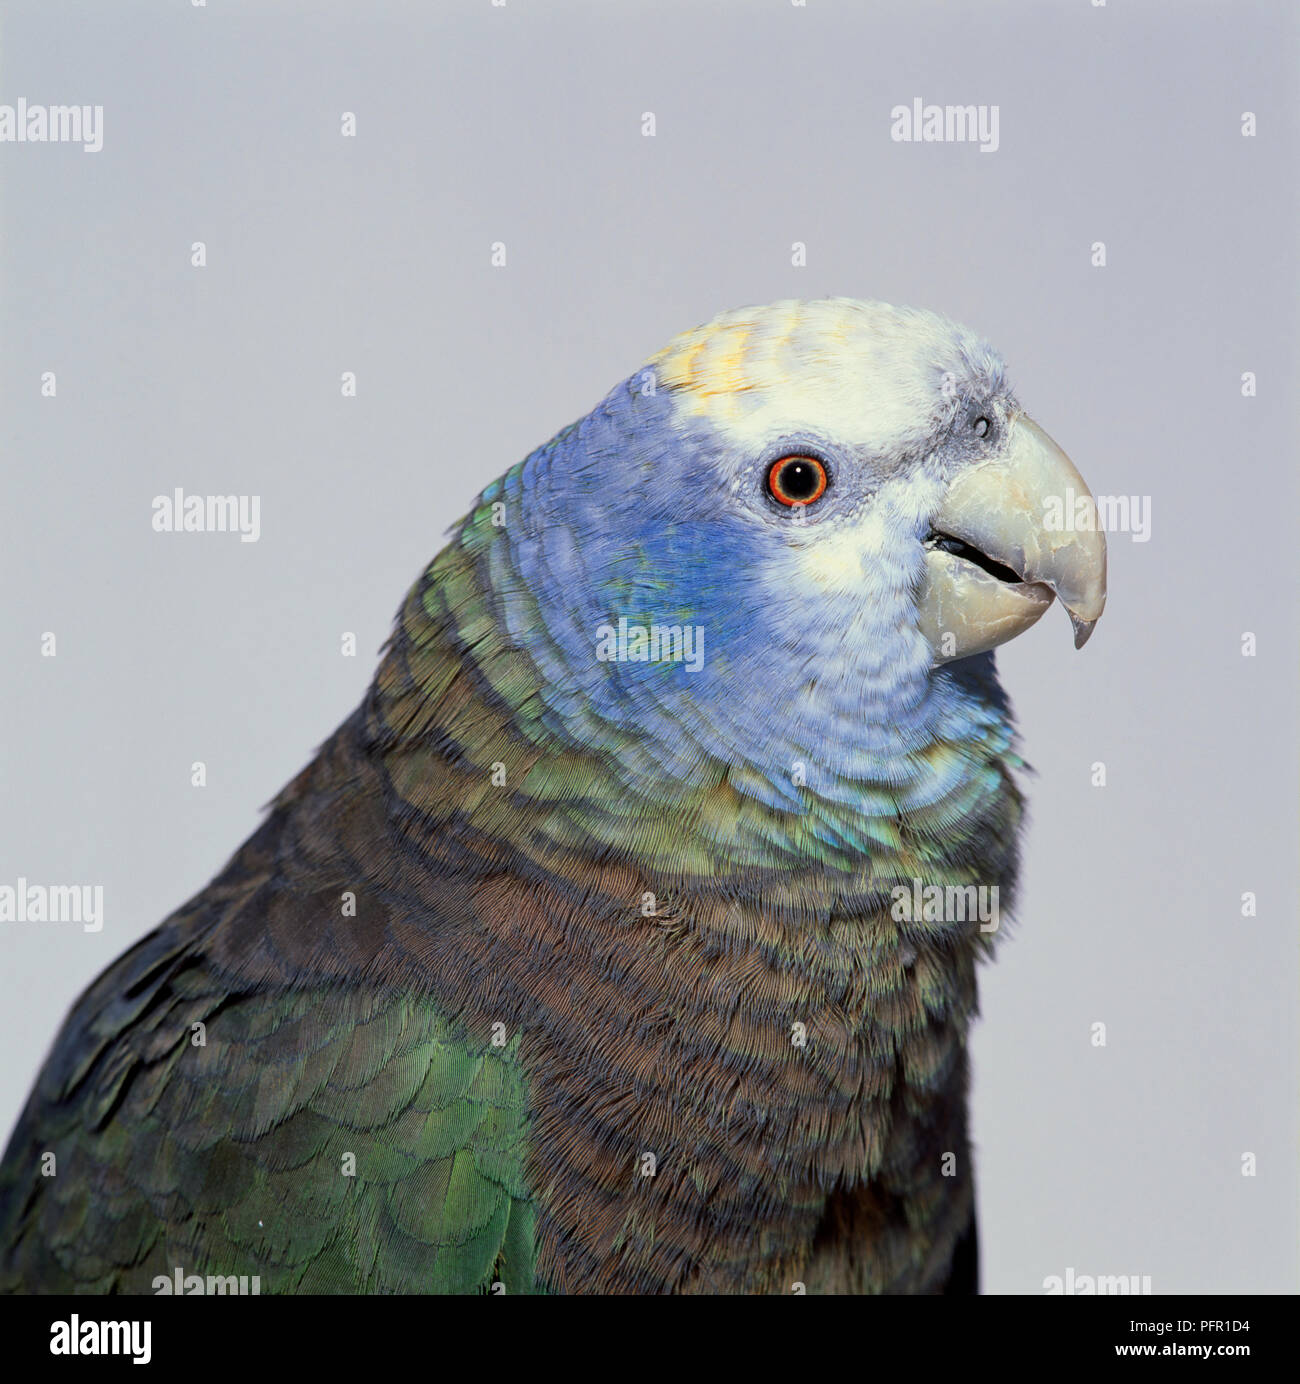 St. Vincent Parrot (Green Phase) with head in profile Stock Photo